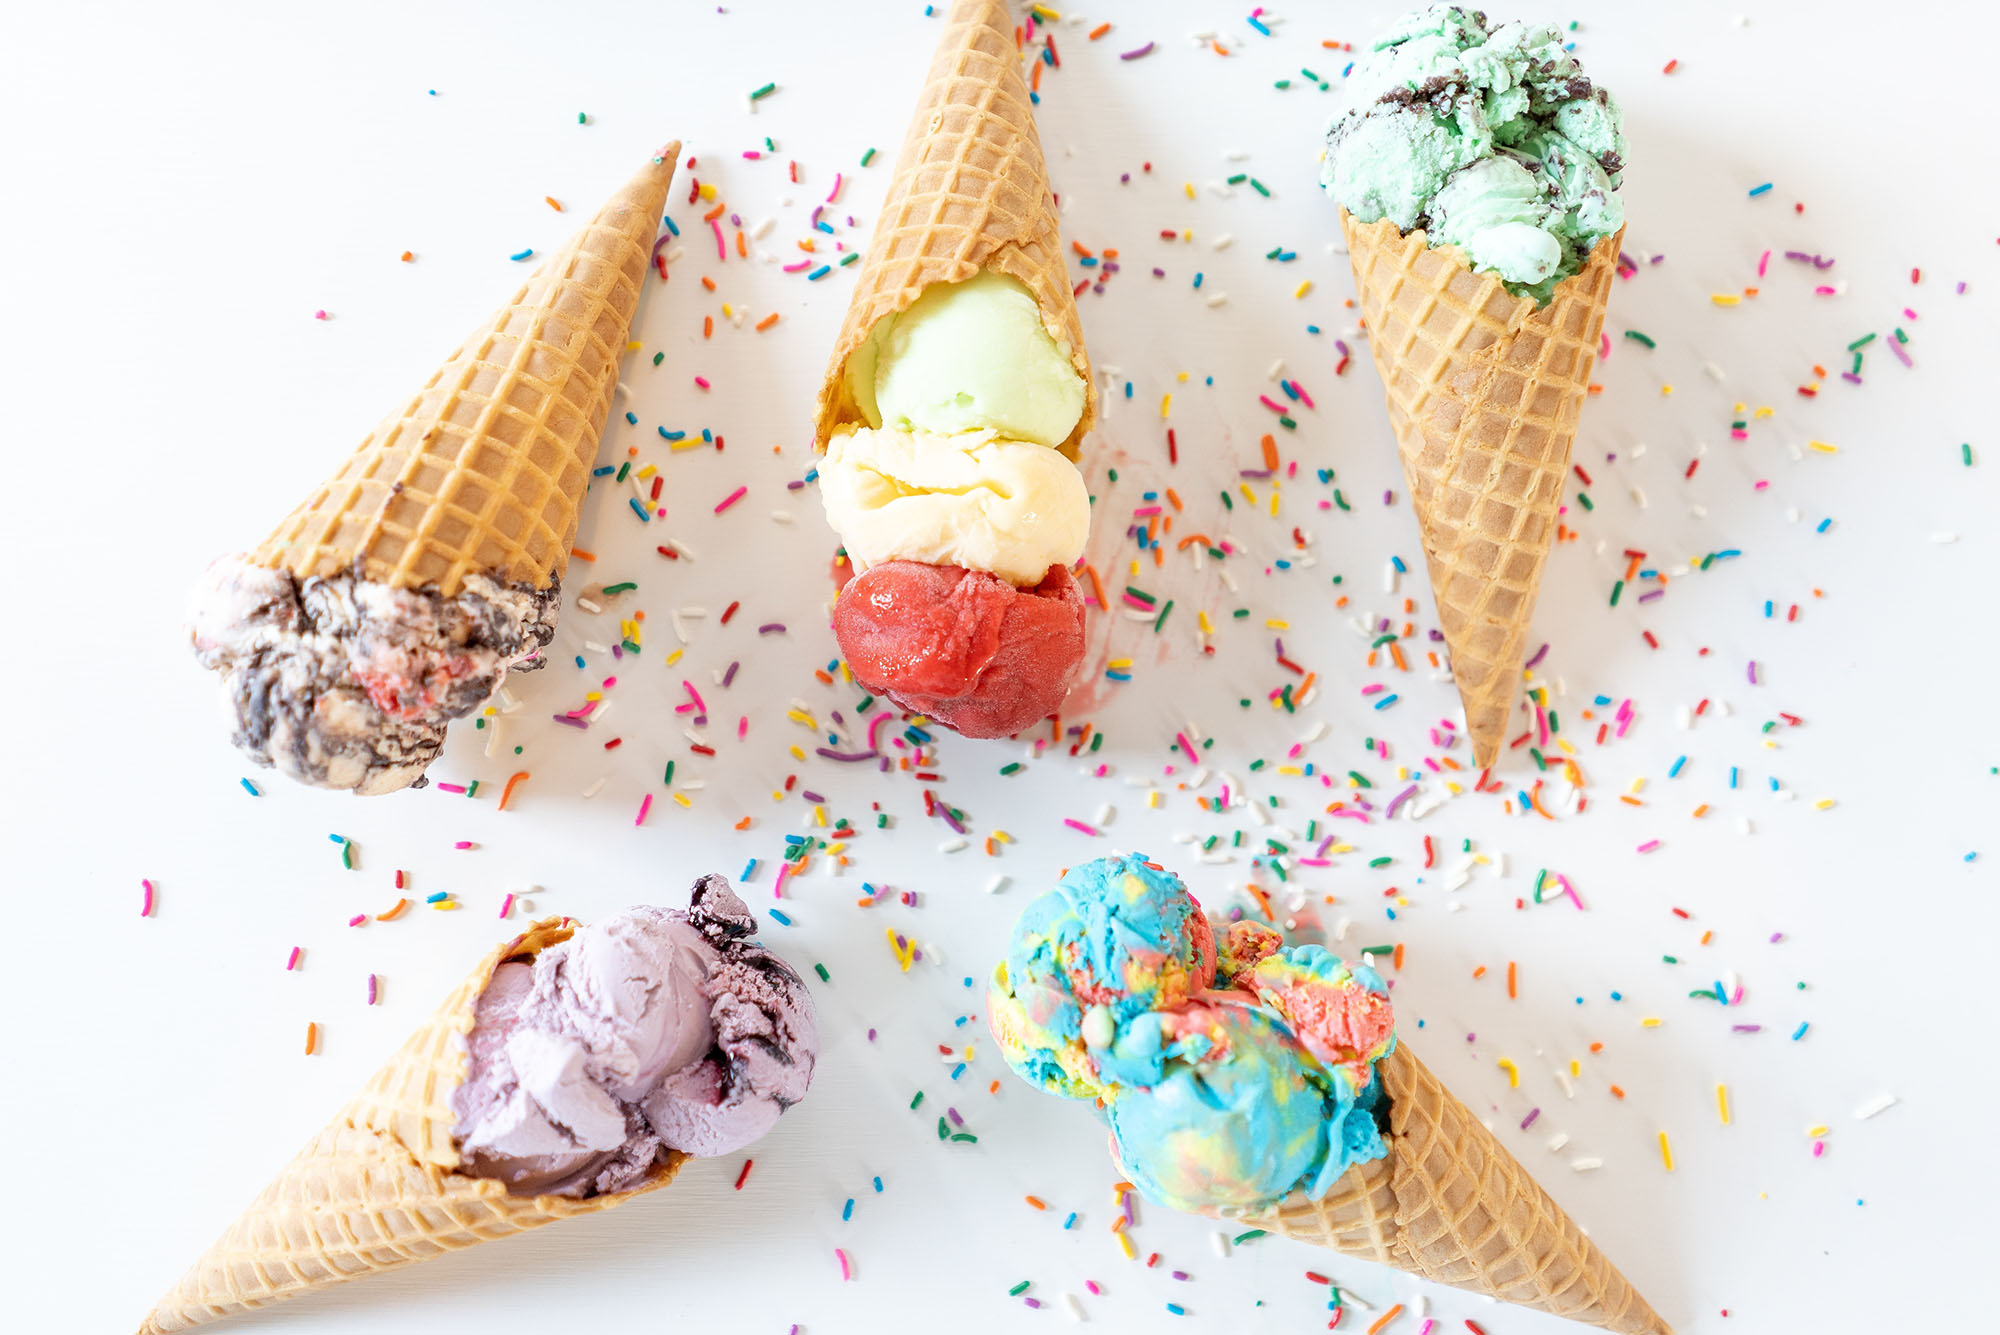 Photo: A white table top with five different ice creams with a waffle cone are scatterd in a flat-lay.